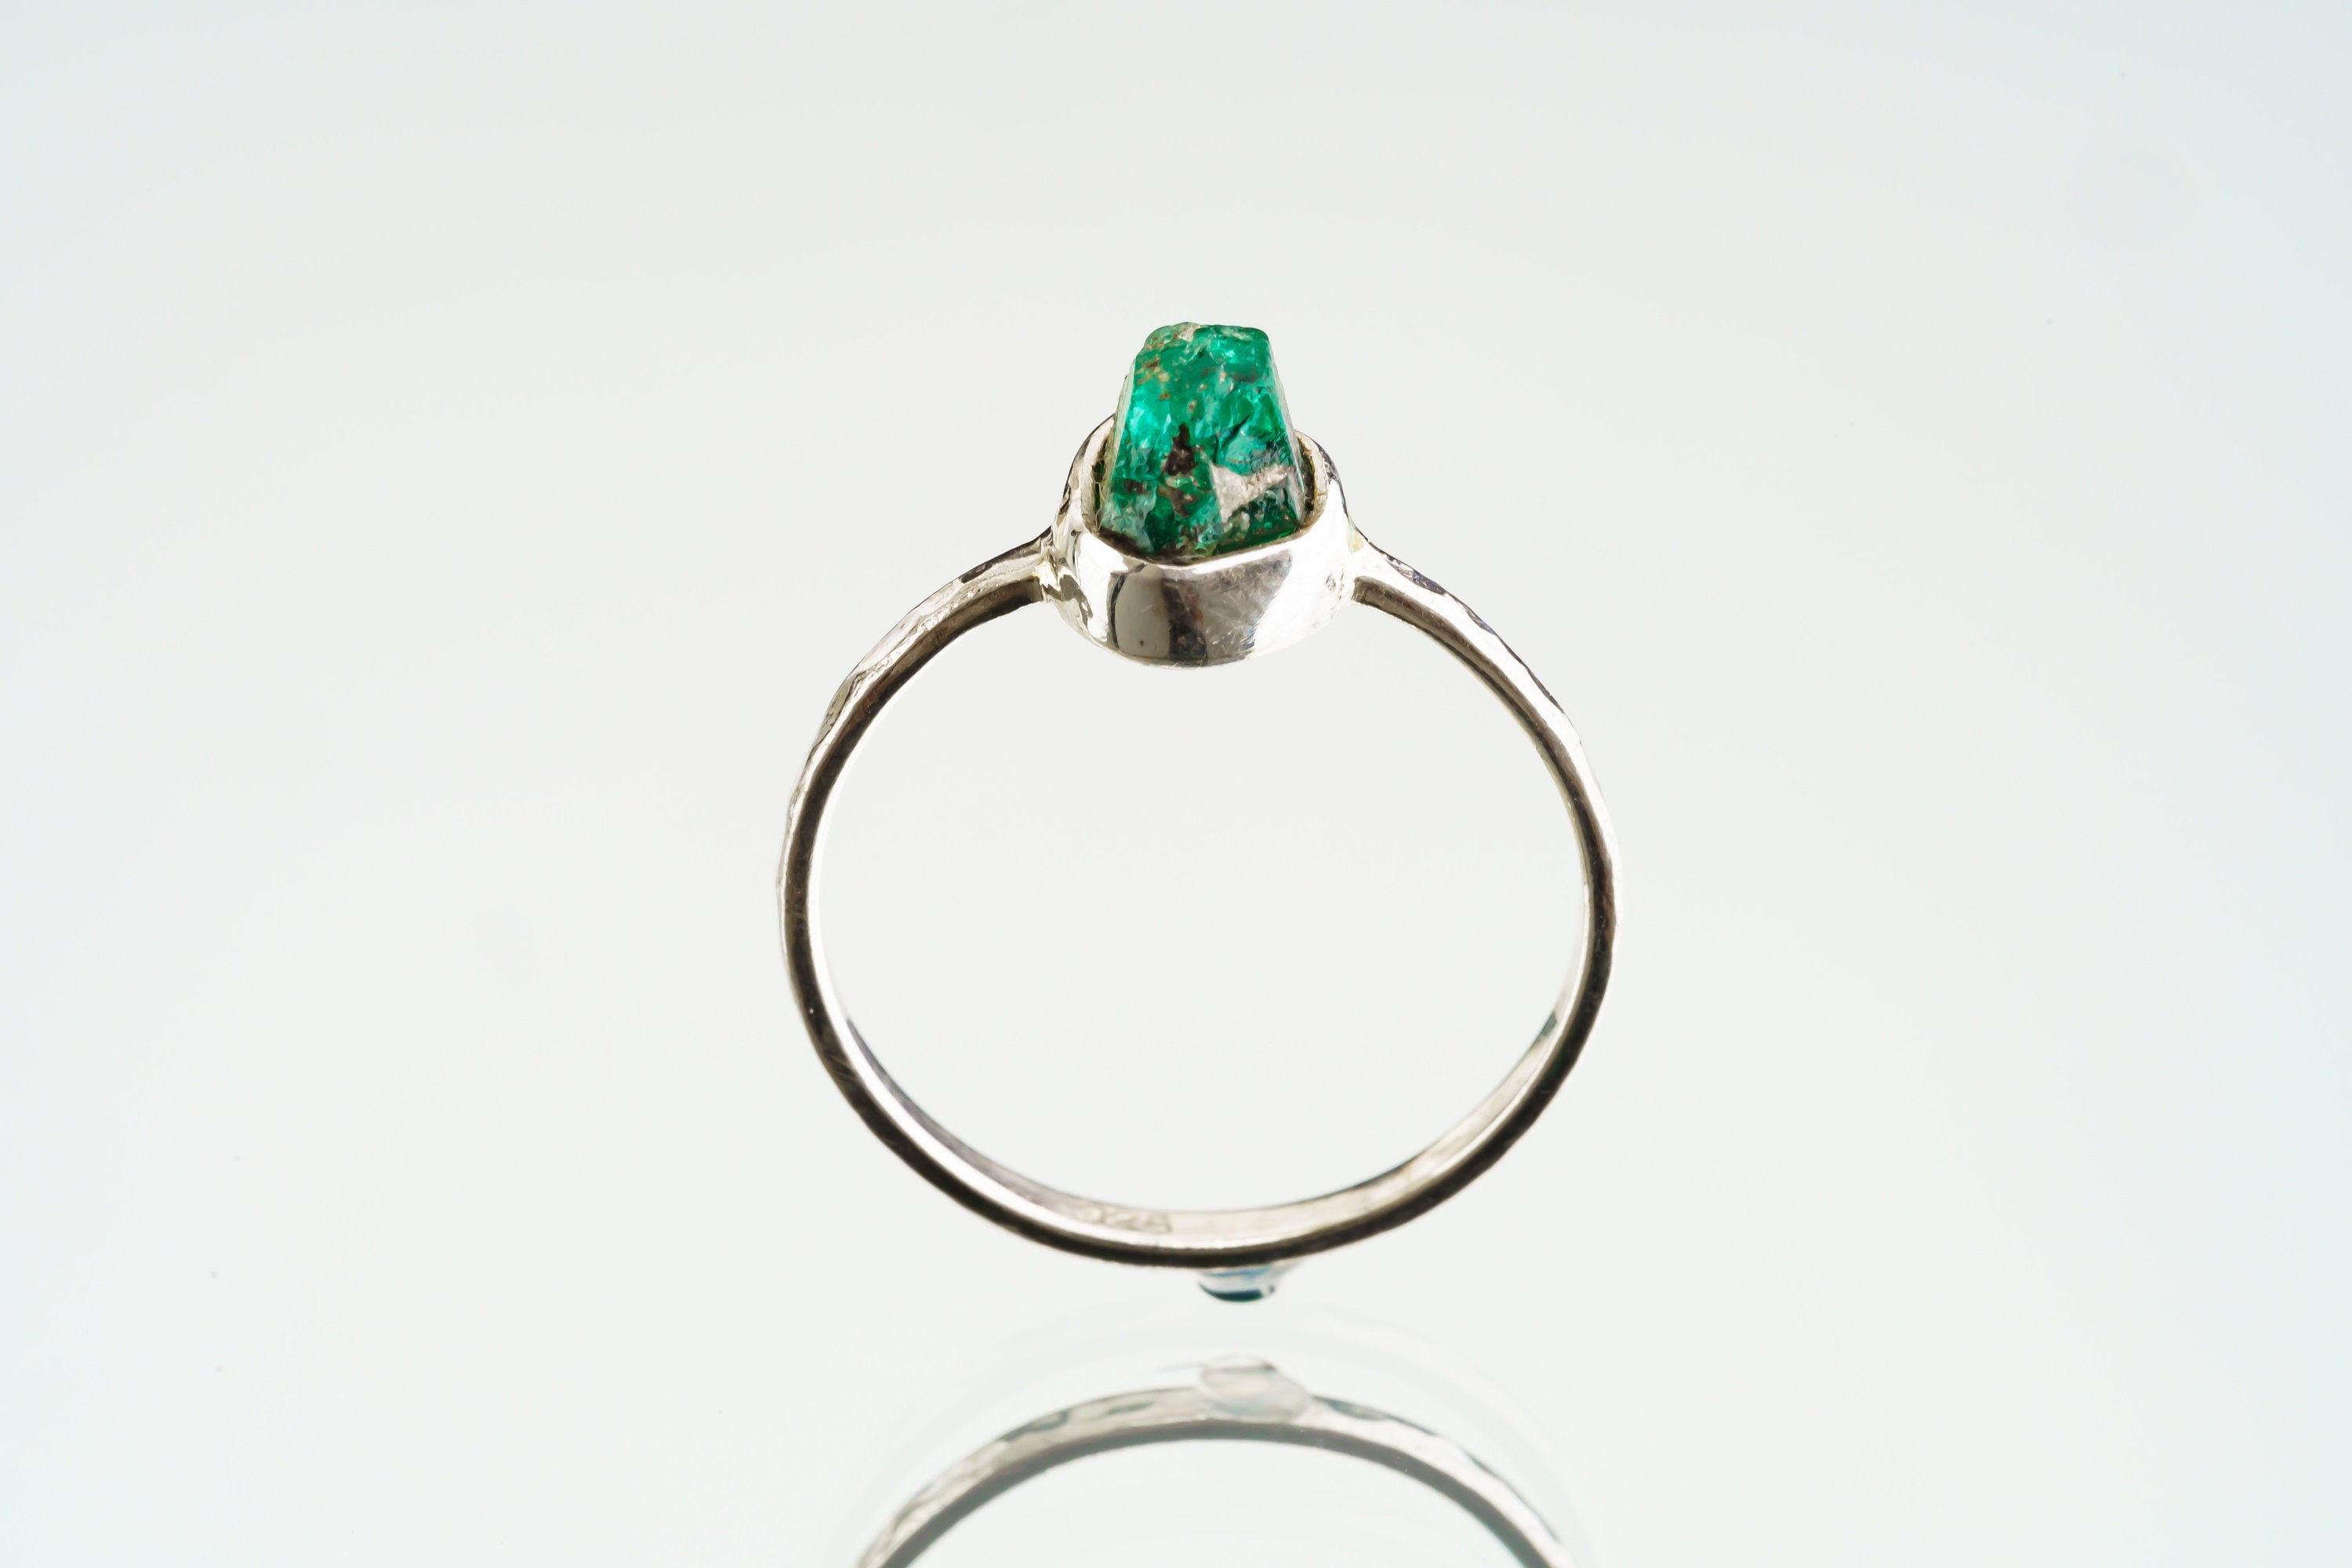 Gemmy Australian Fossicked rough Emerald - Stack Crystal Ring - Size 6 US - 925 Sterling Silver - Thin Band Hammer Textured